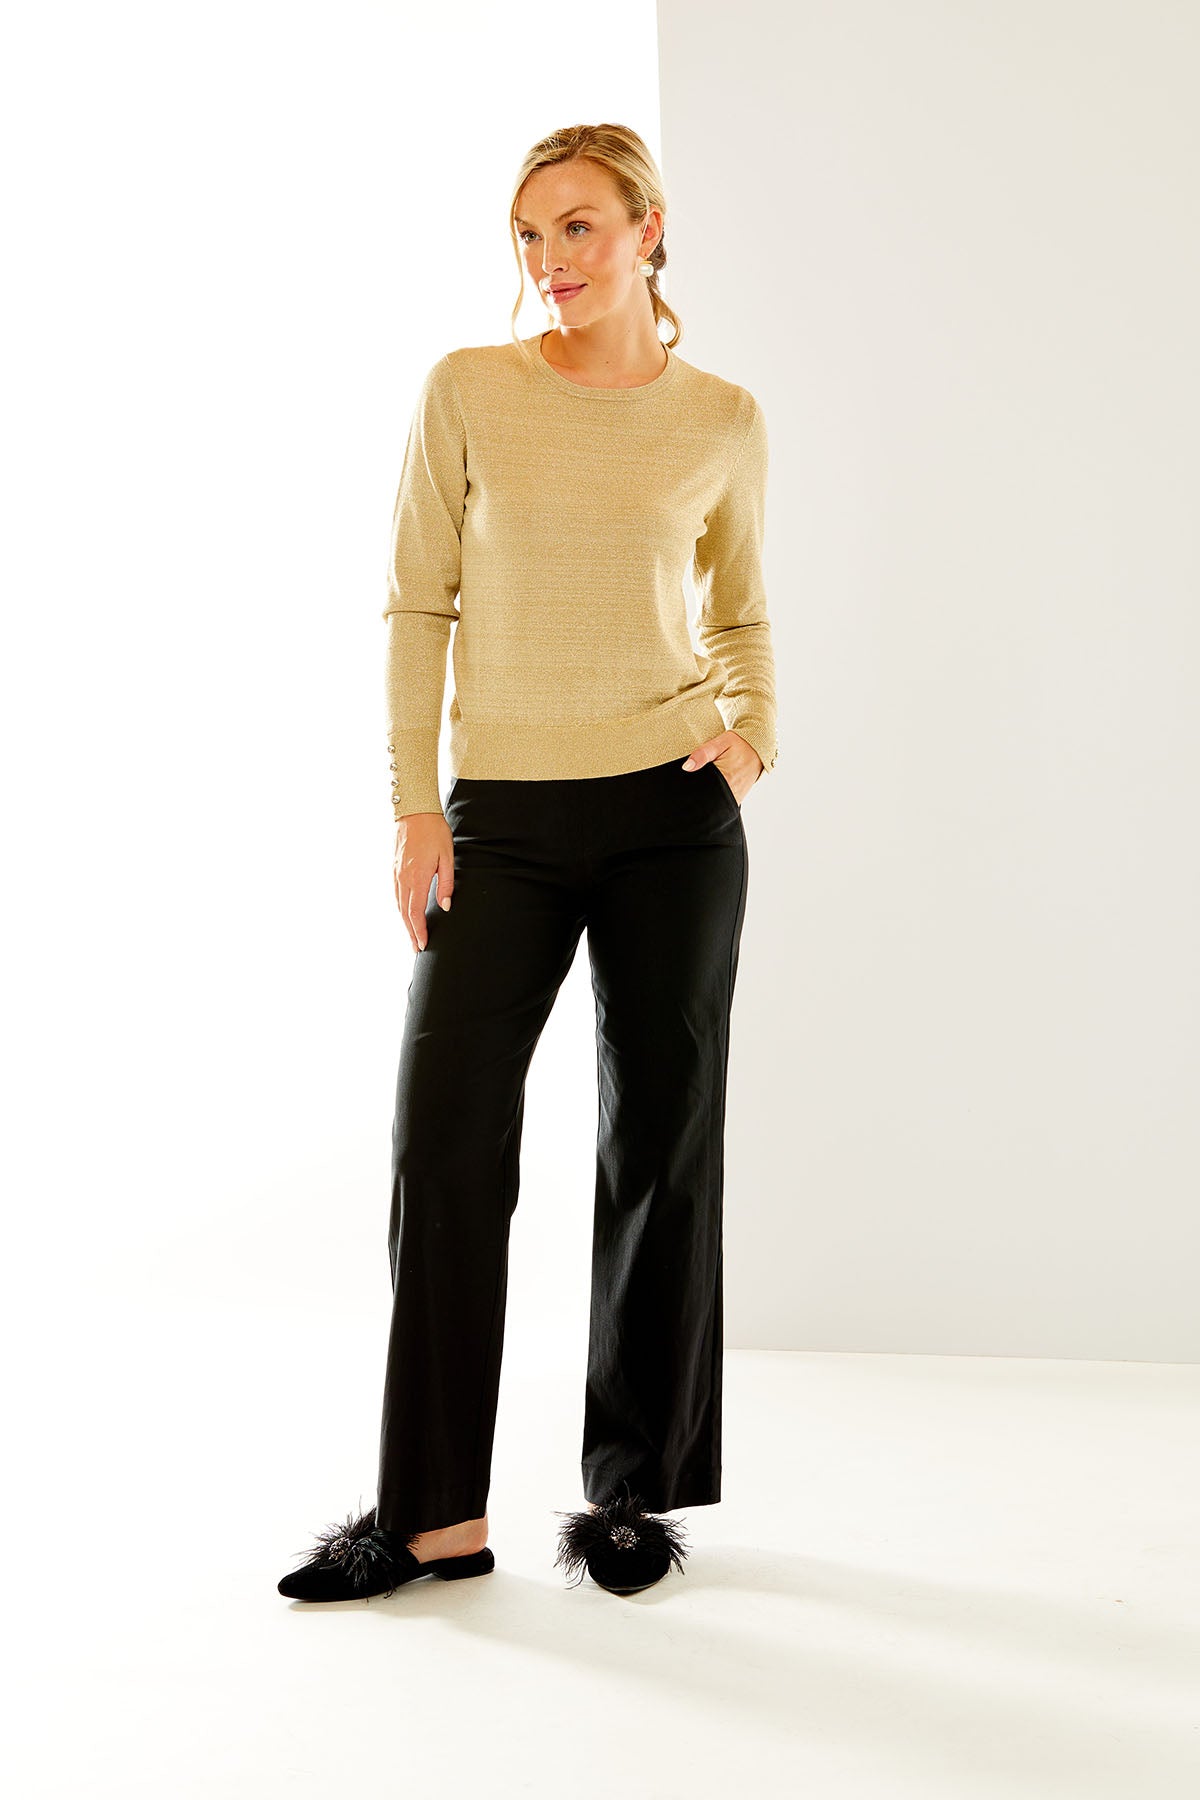 Woman in gold shimmer crewneck pullover